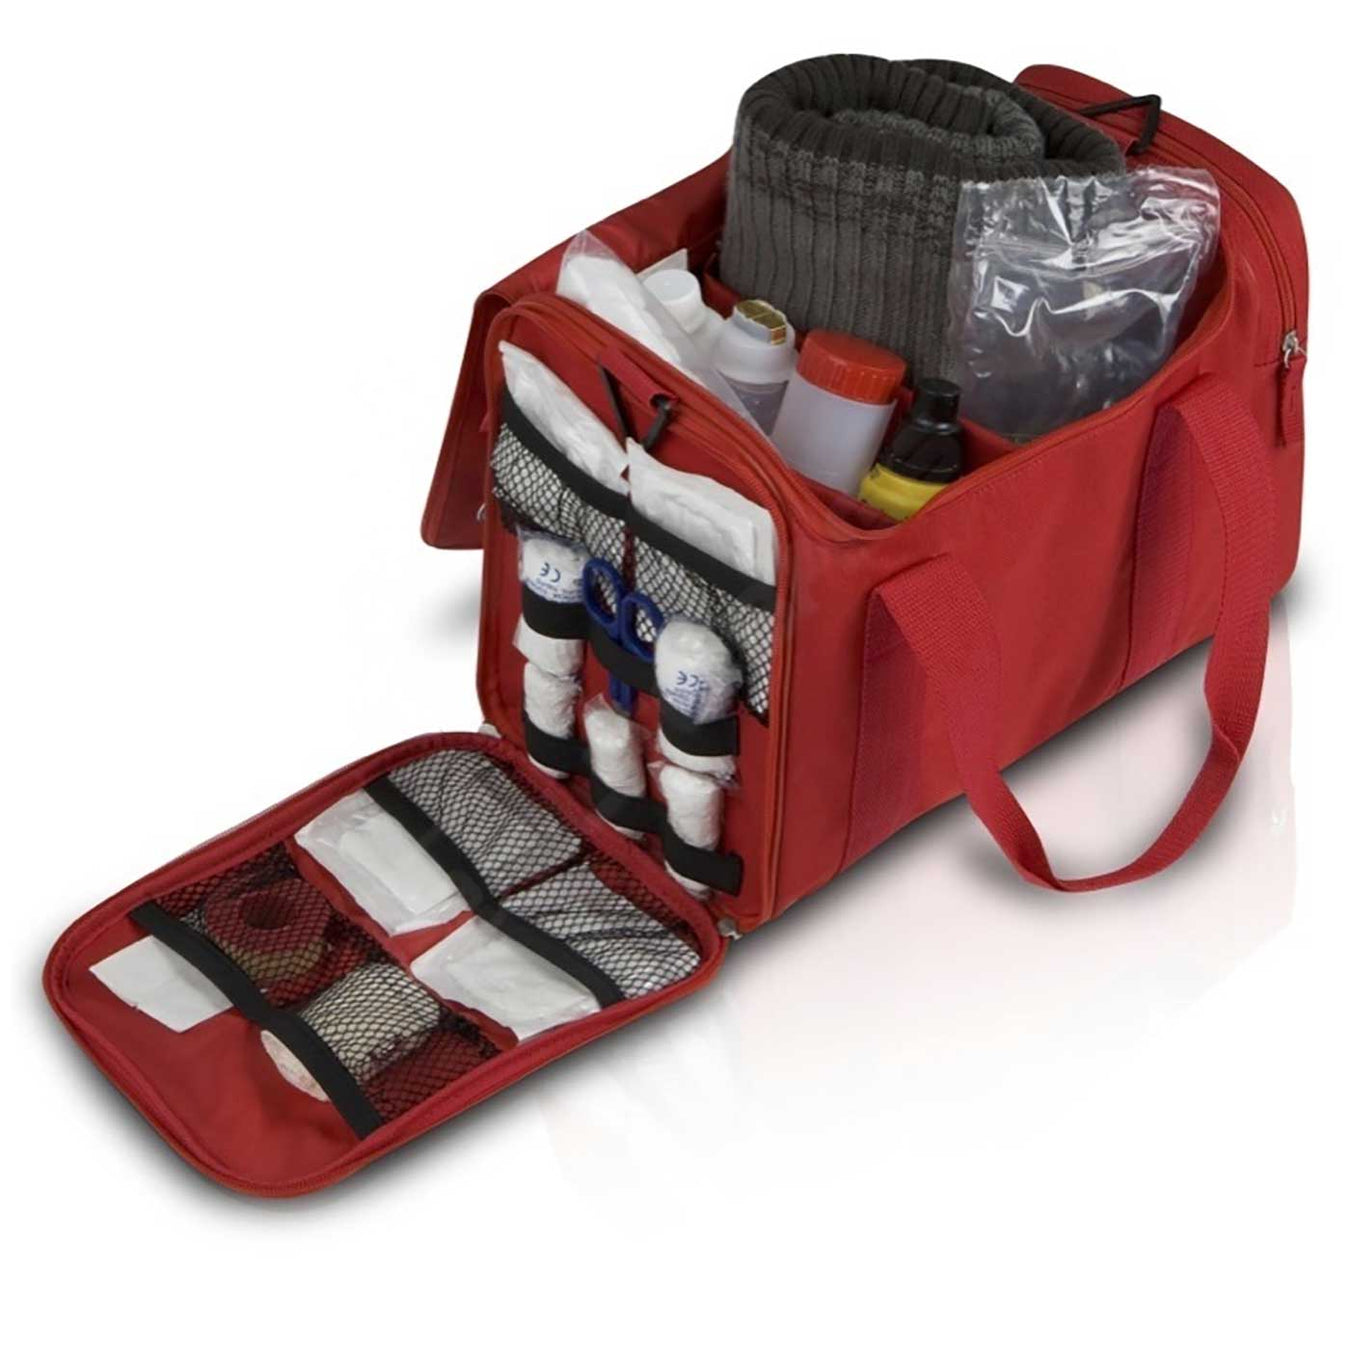 First Aid Kits / Bags | Medscope